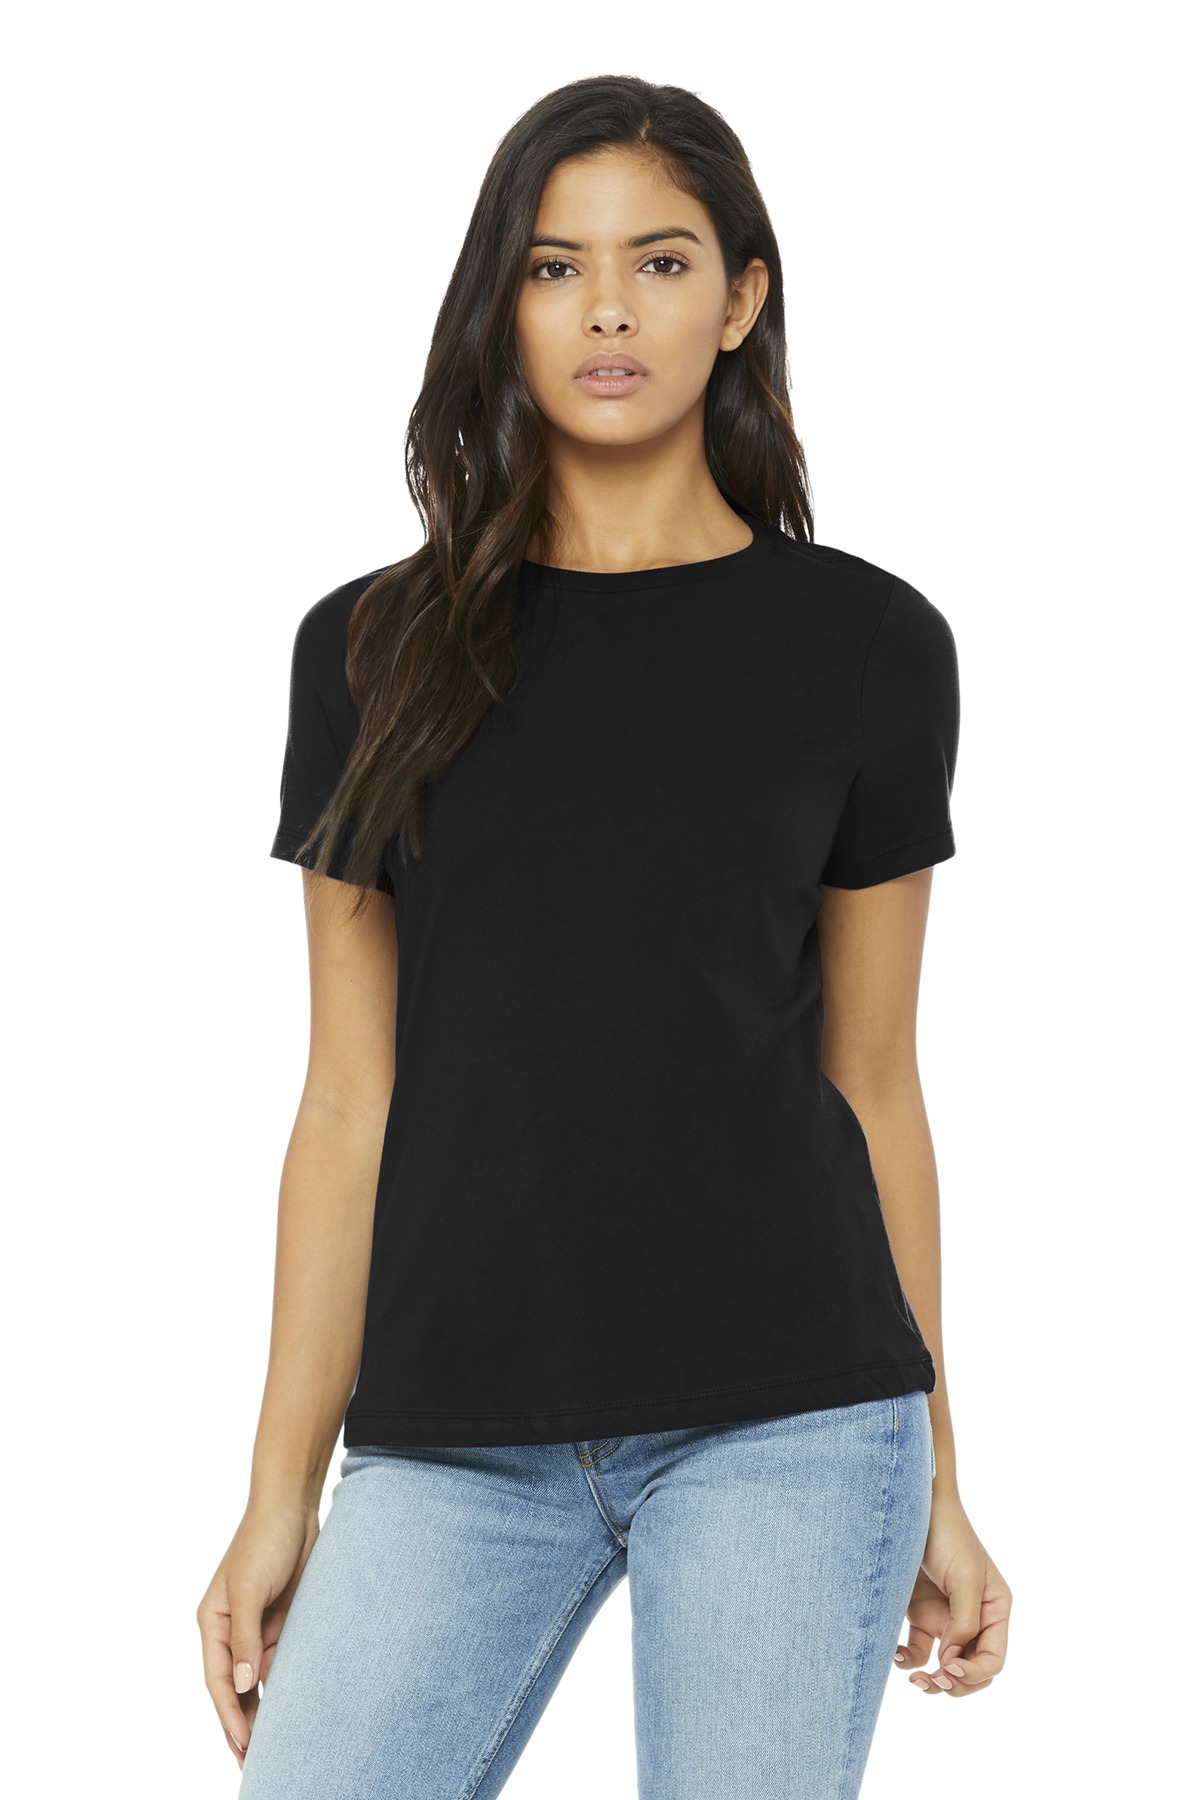 BELLA+CANVAS Women''s Relaxed Jersey Short Sleeve Tee. BC6400